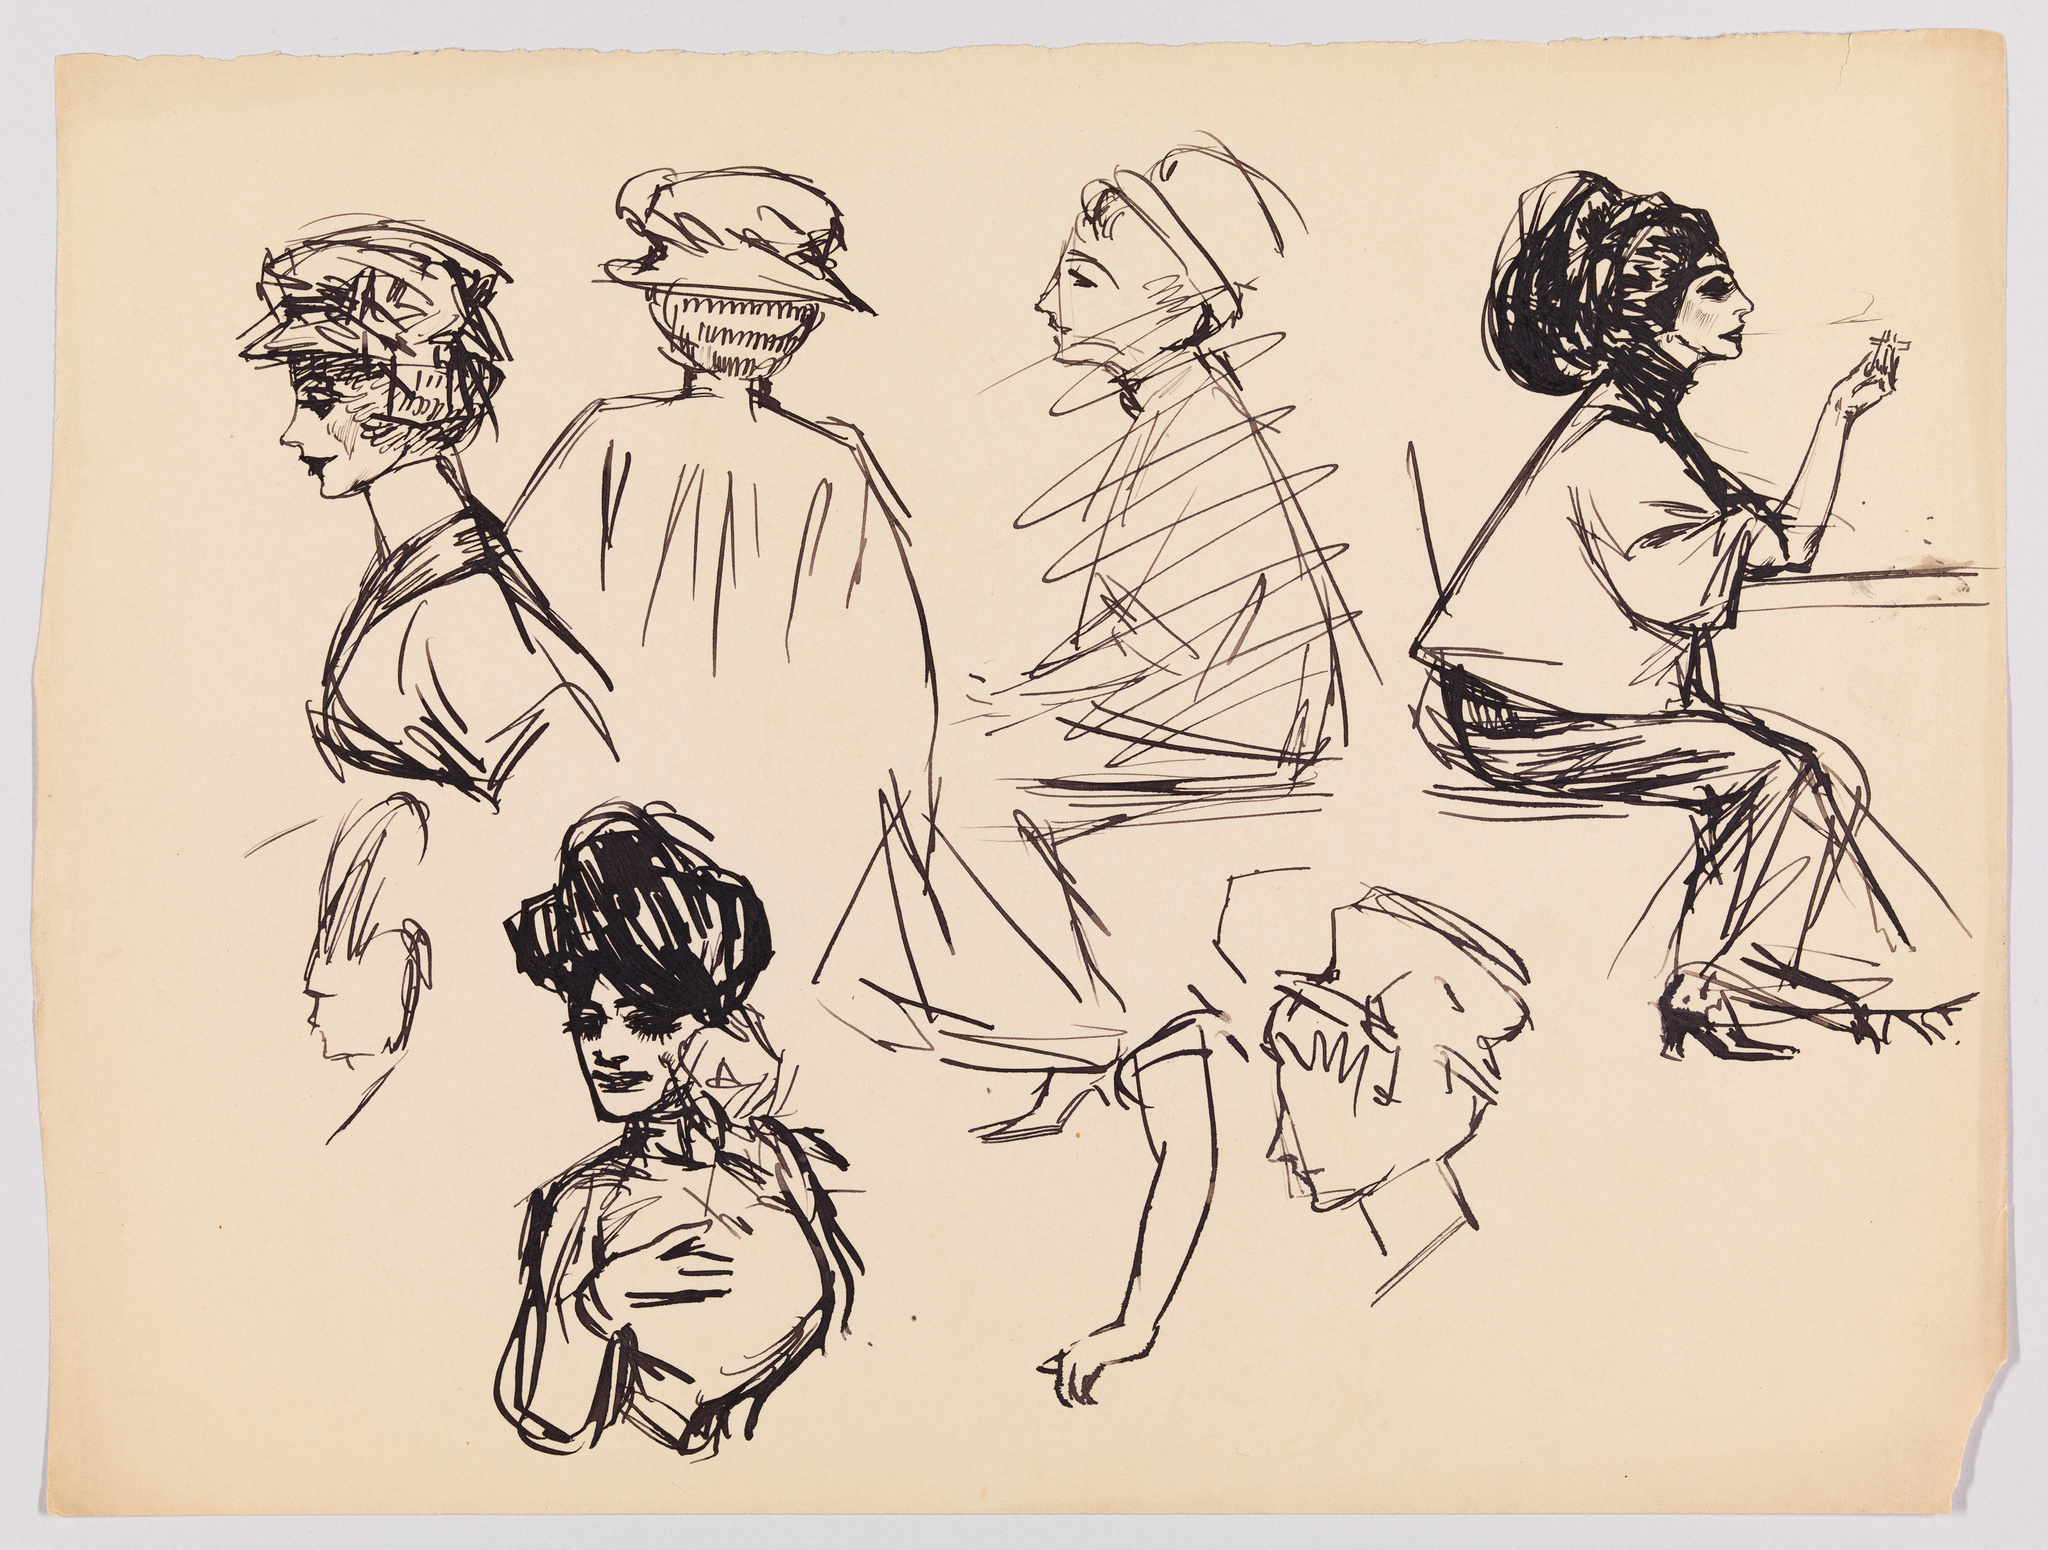 Edward Hopper Study of a Seated Man in Profile  Edward hopper American  realism Sketches